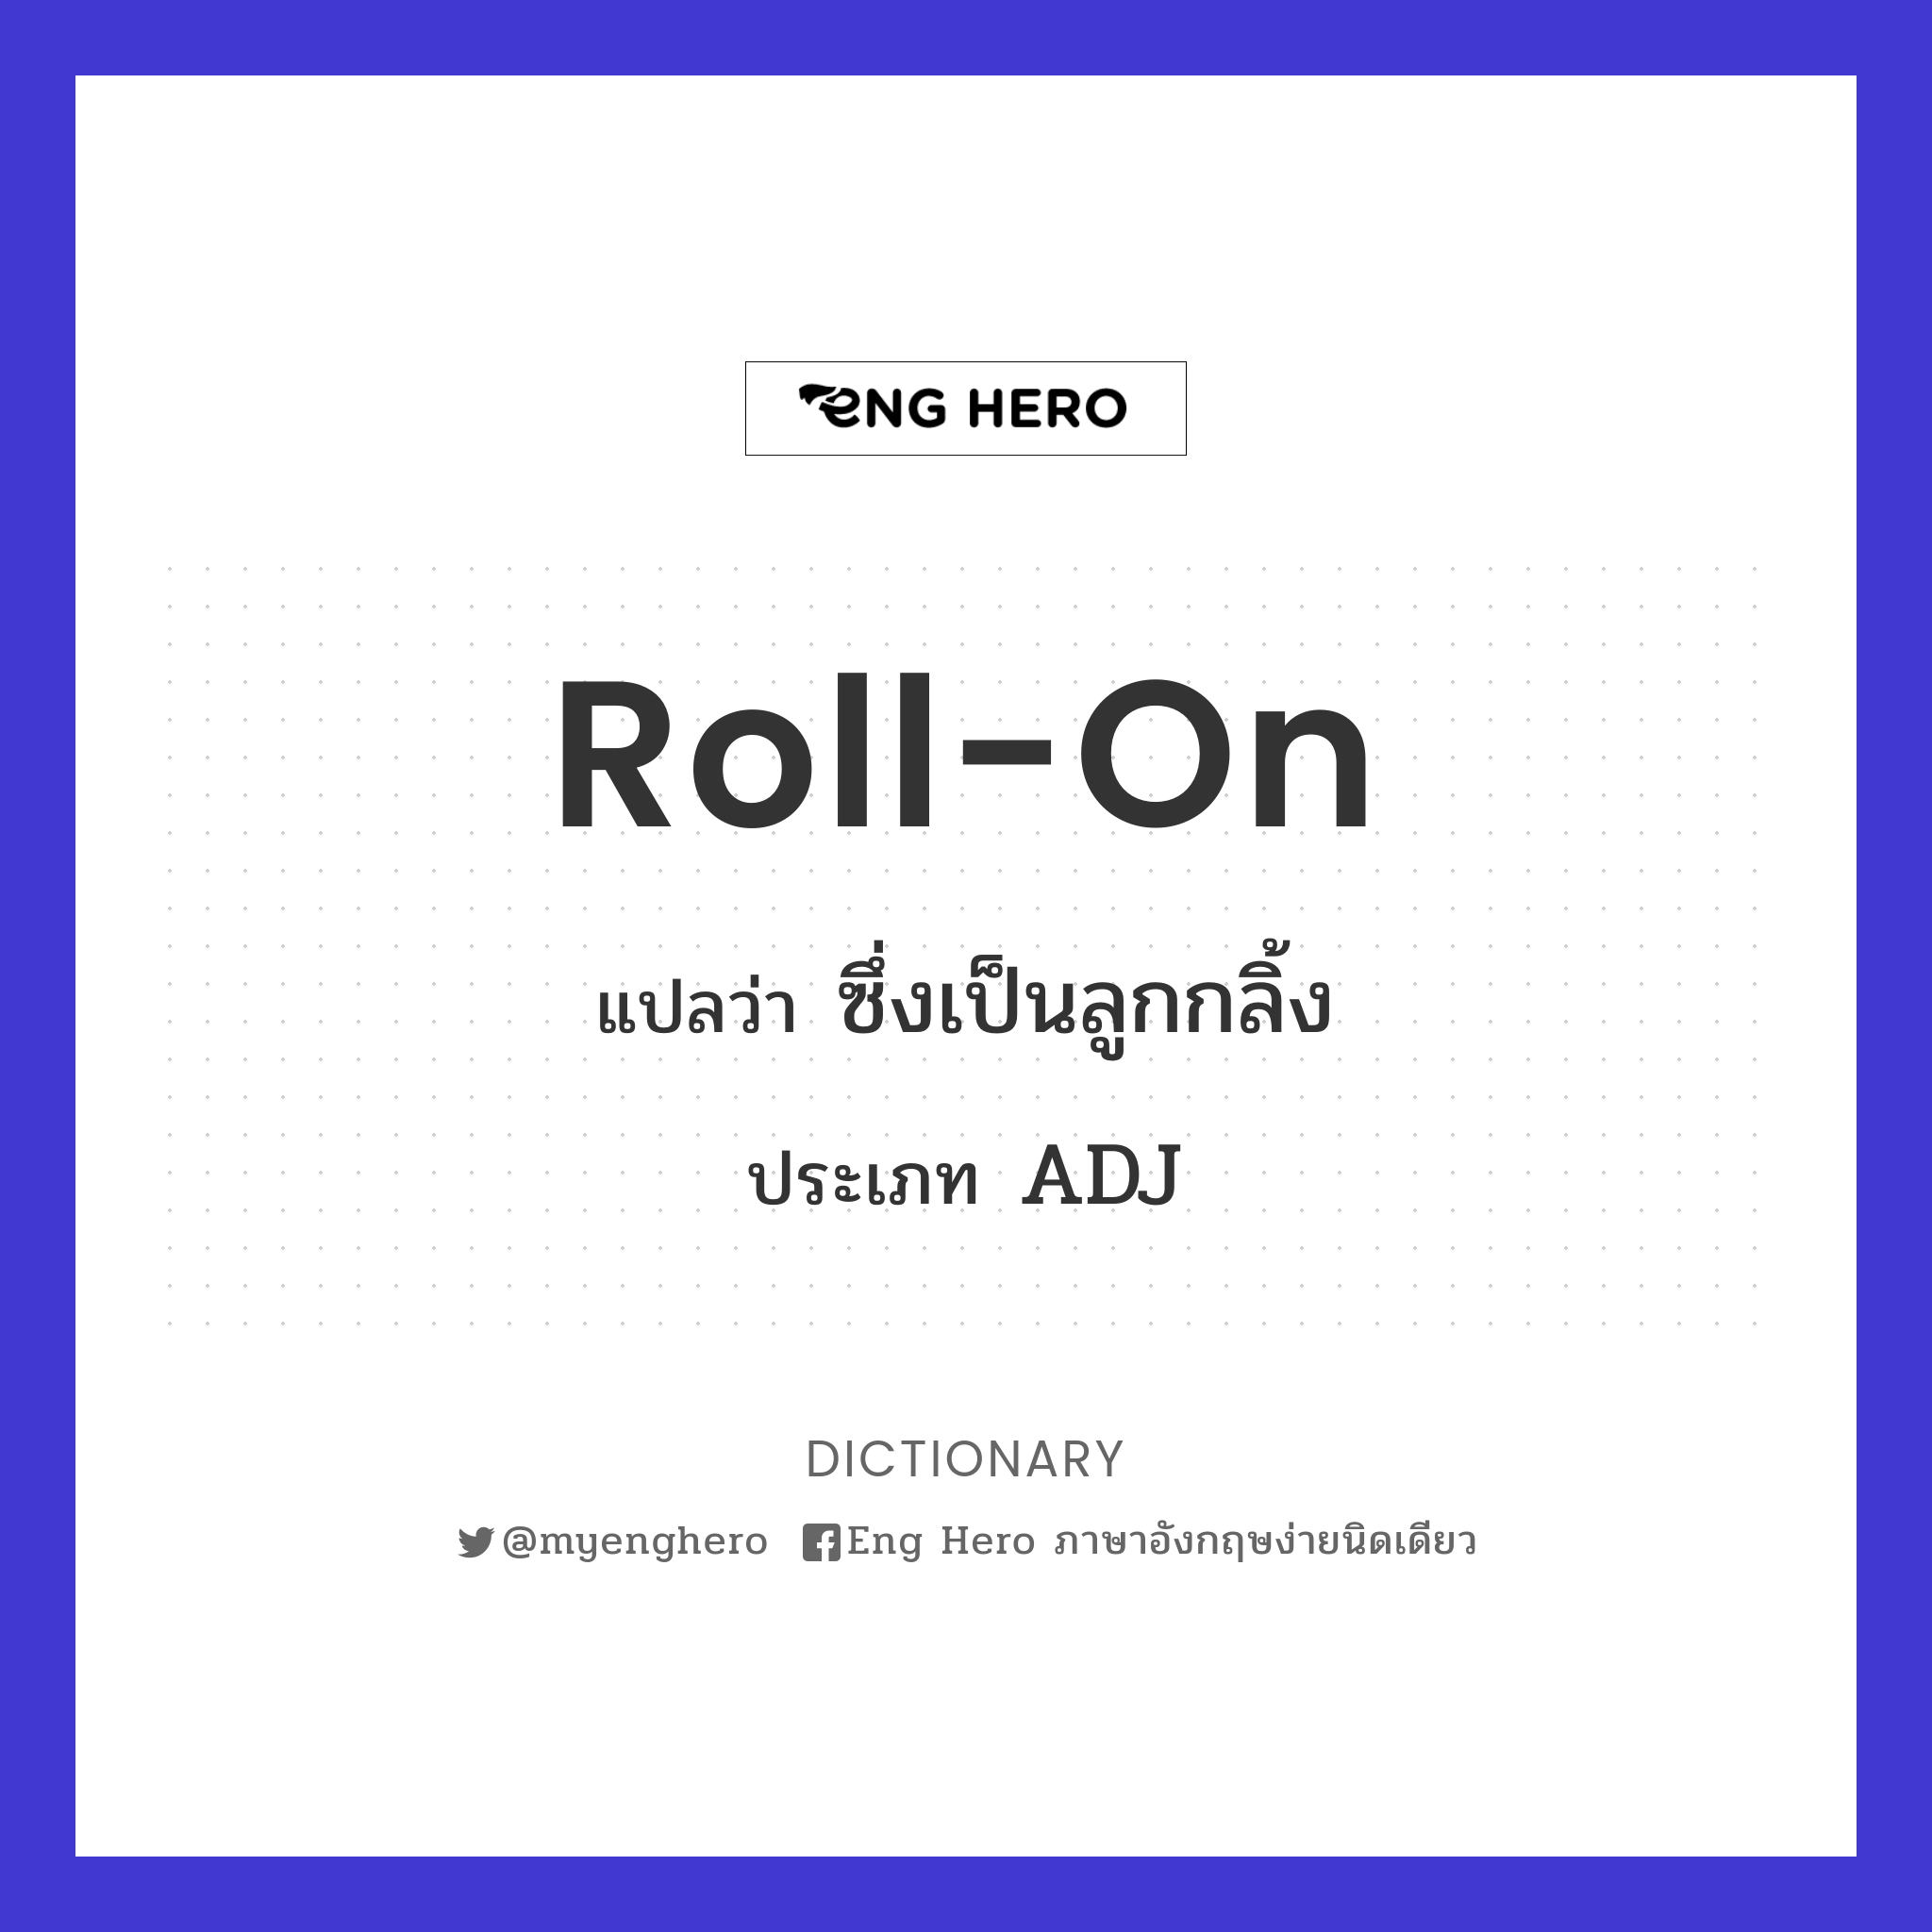 roll-on